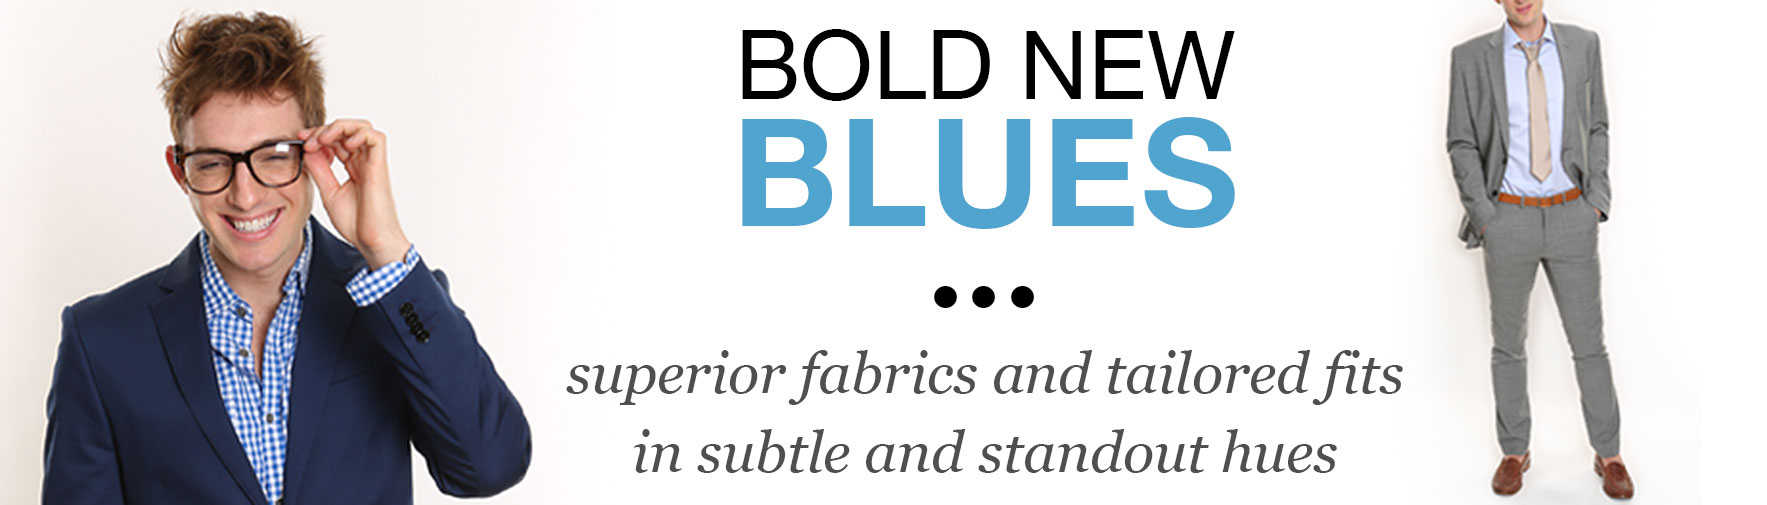 Bold New Blues - superior fabrics and tailored fits in subtle and standout hues